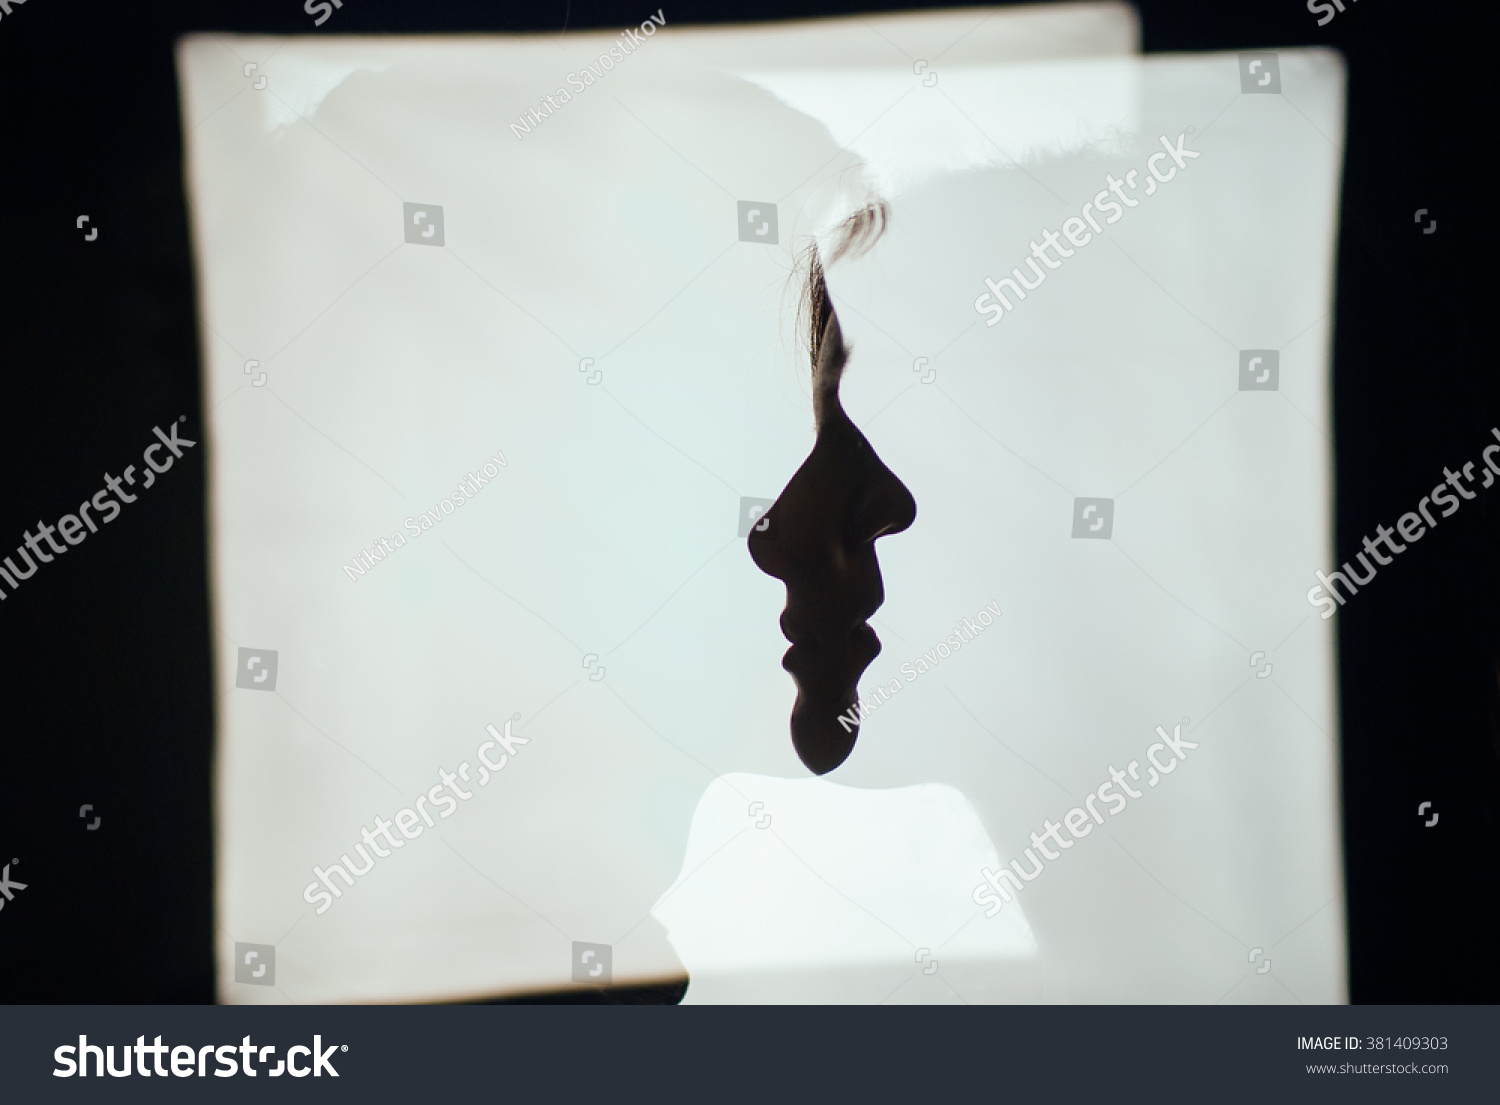 A silhouette photograph of a couple: shadows of a boy and a girl in each other on white background #381409303